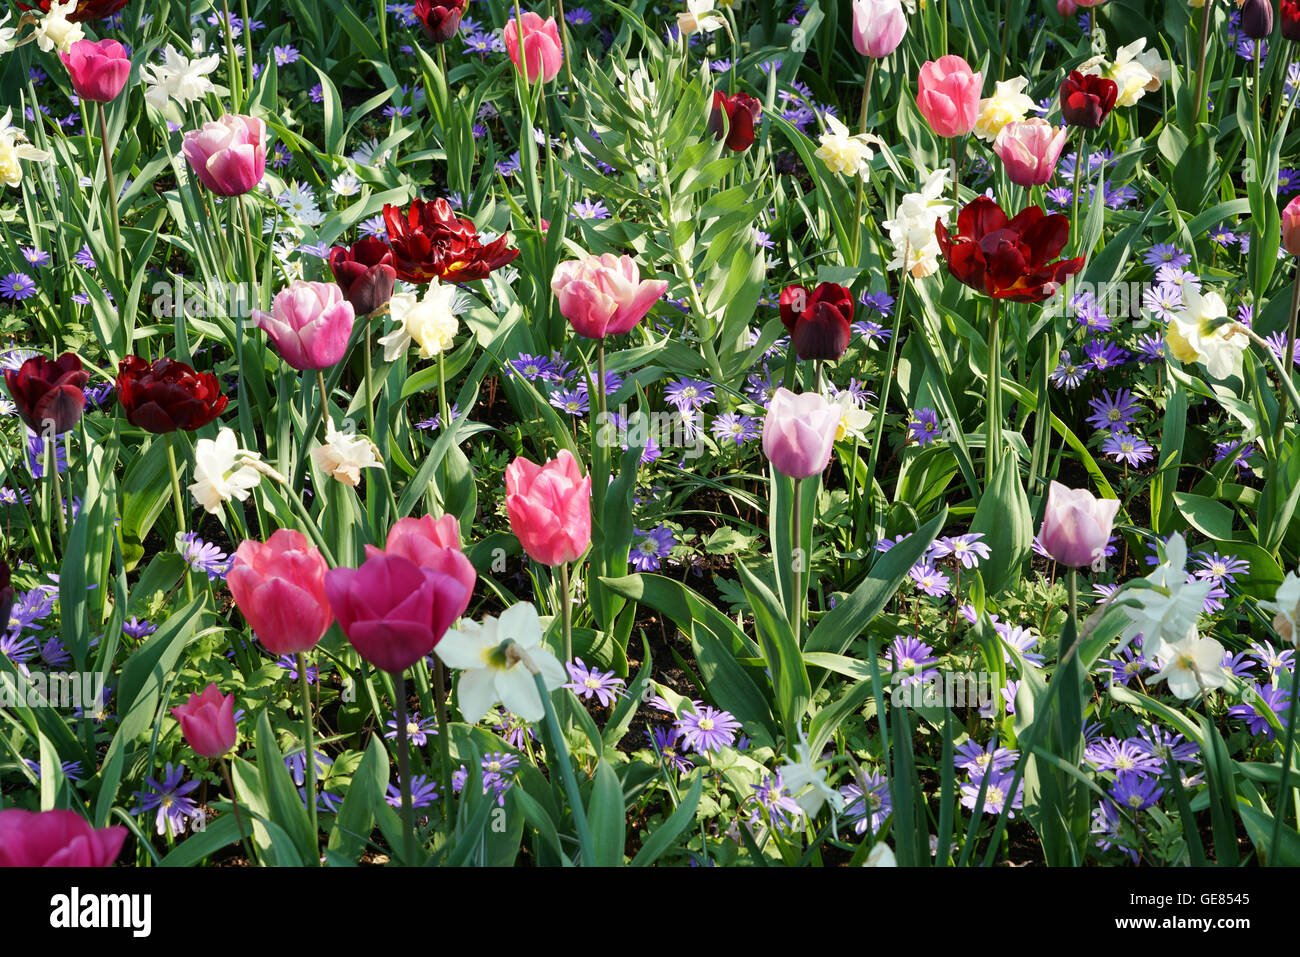 red and rose tulips, daffodils and purple swan river daisy Stock Photo